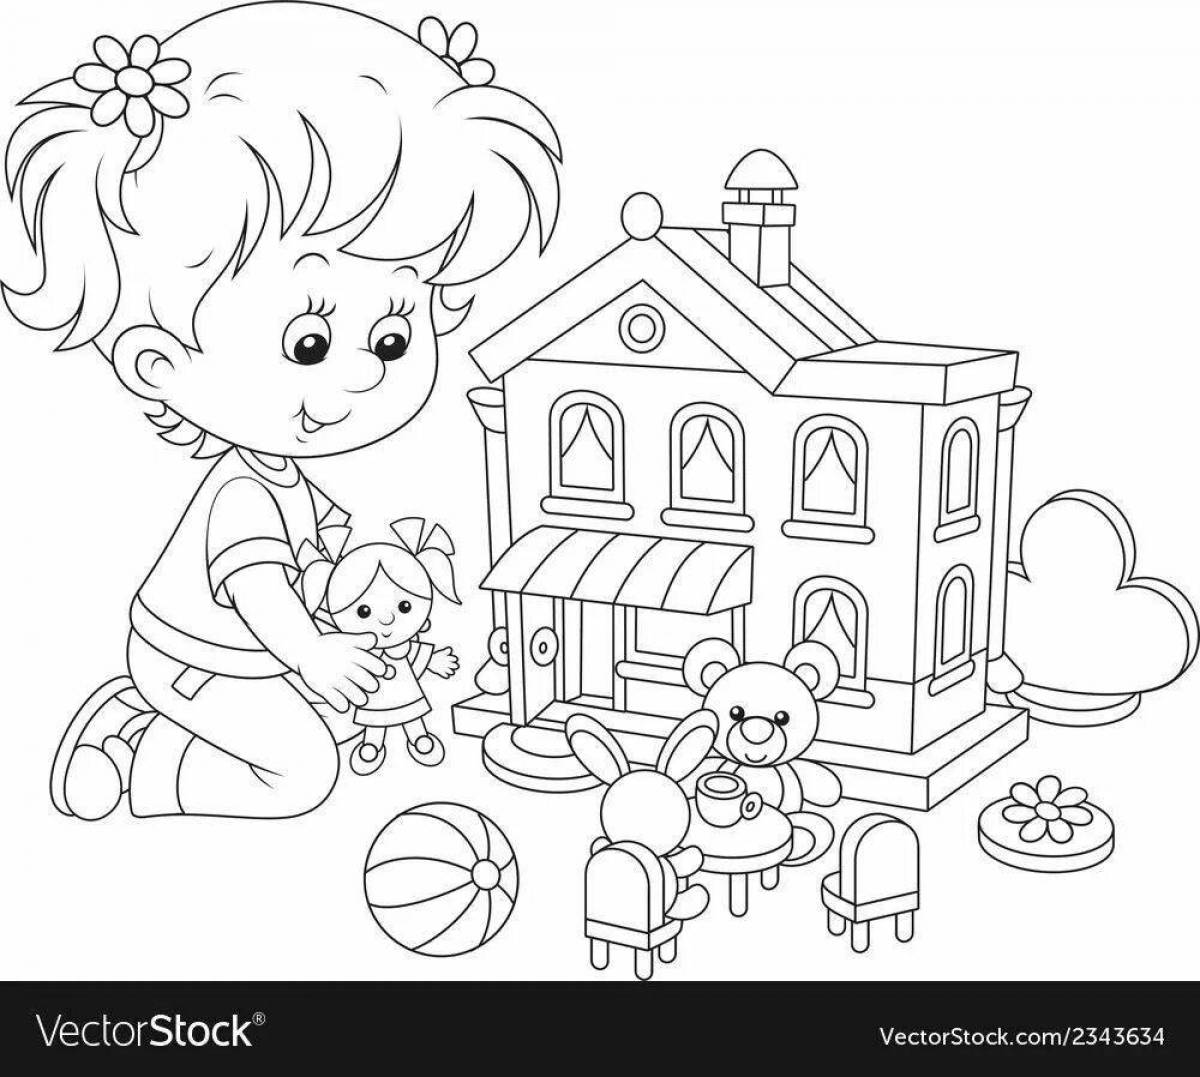 Bright home coloring game